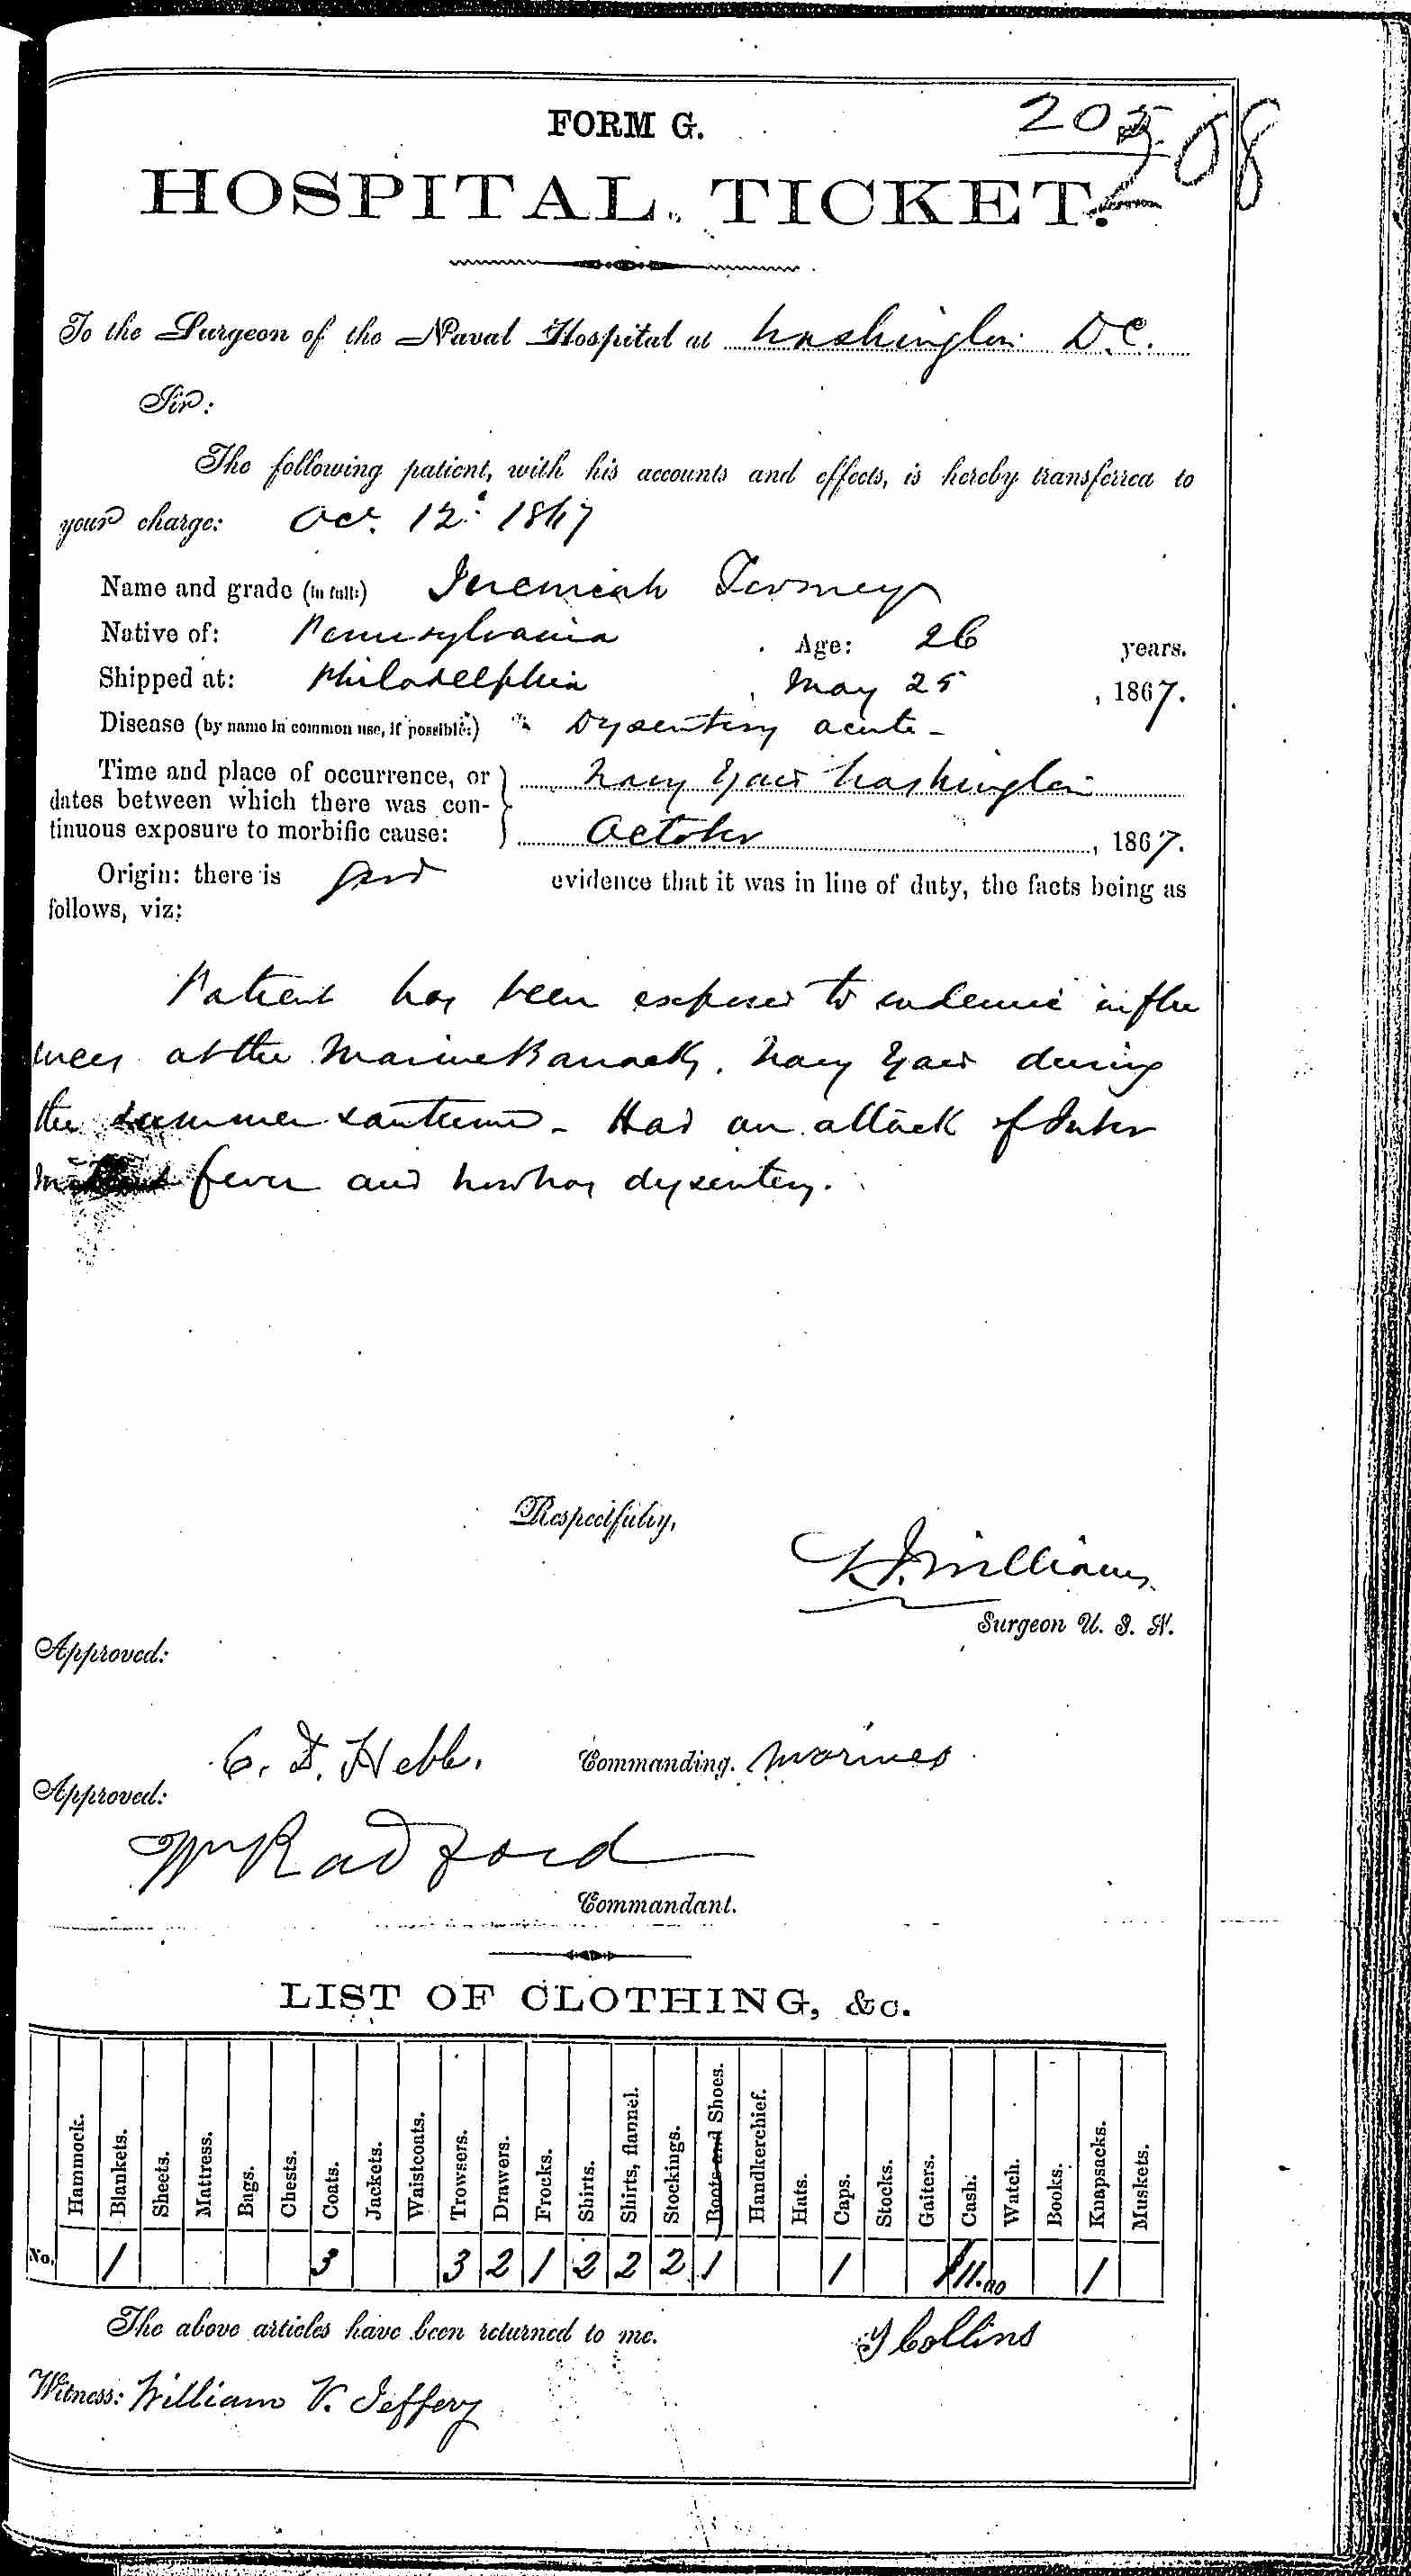 Entry for Jeremiah Tomey (page 1 of 2) in the log Hospital Tickets and Case Papers - Naval Hospital - Washington, D.C. - 1866-68